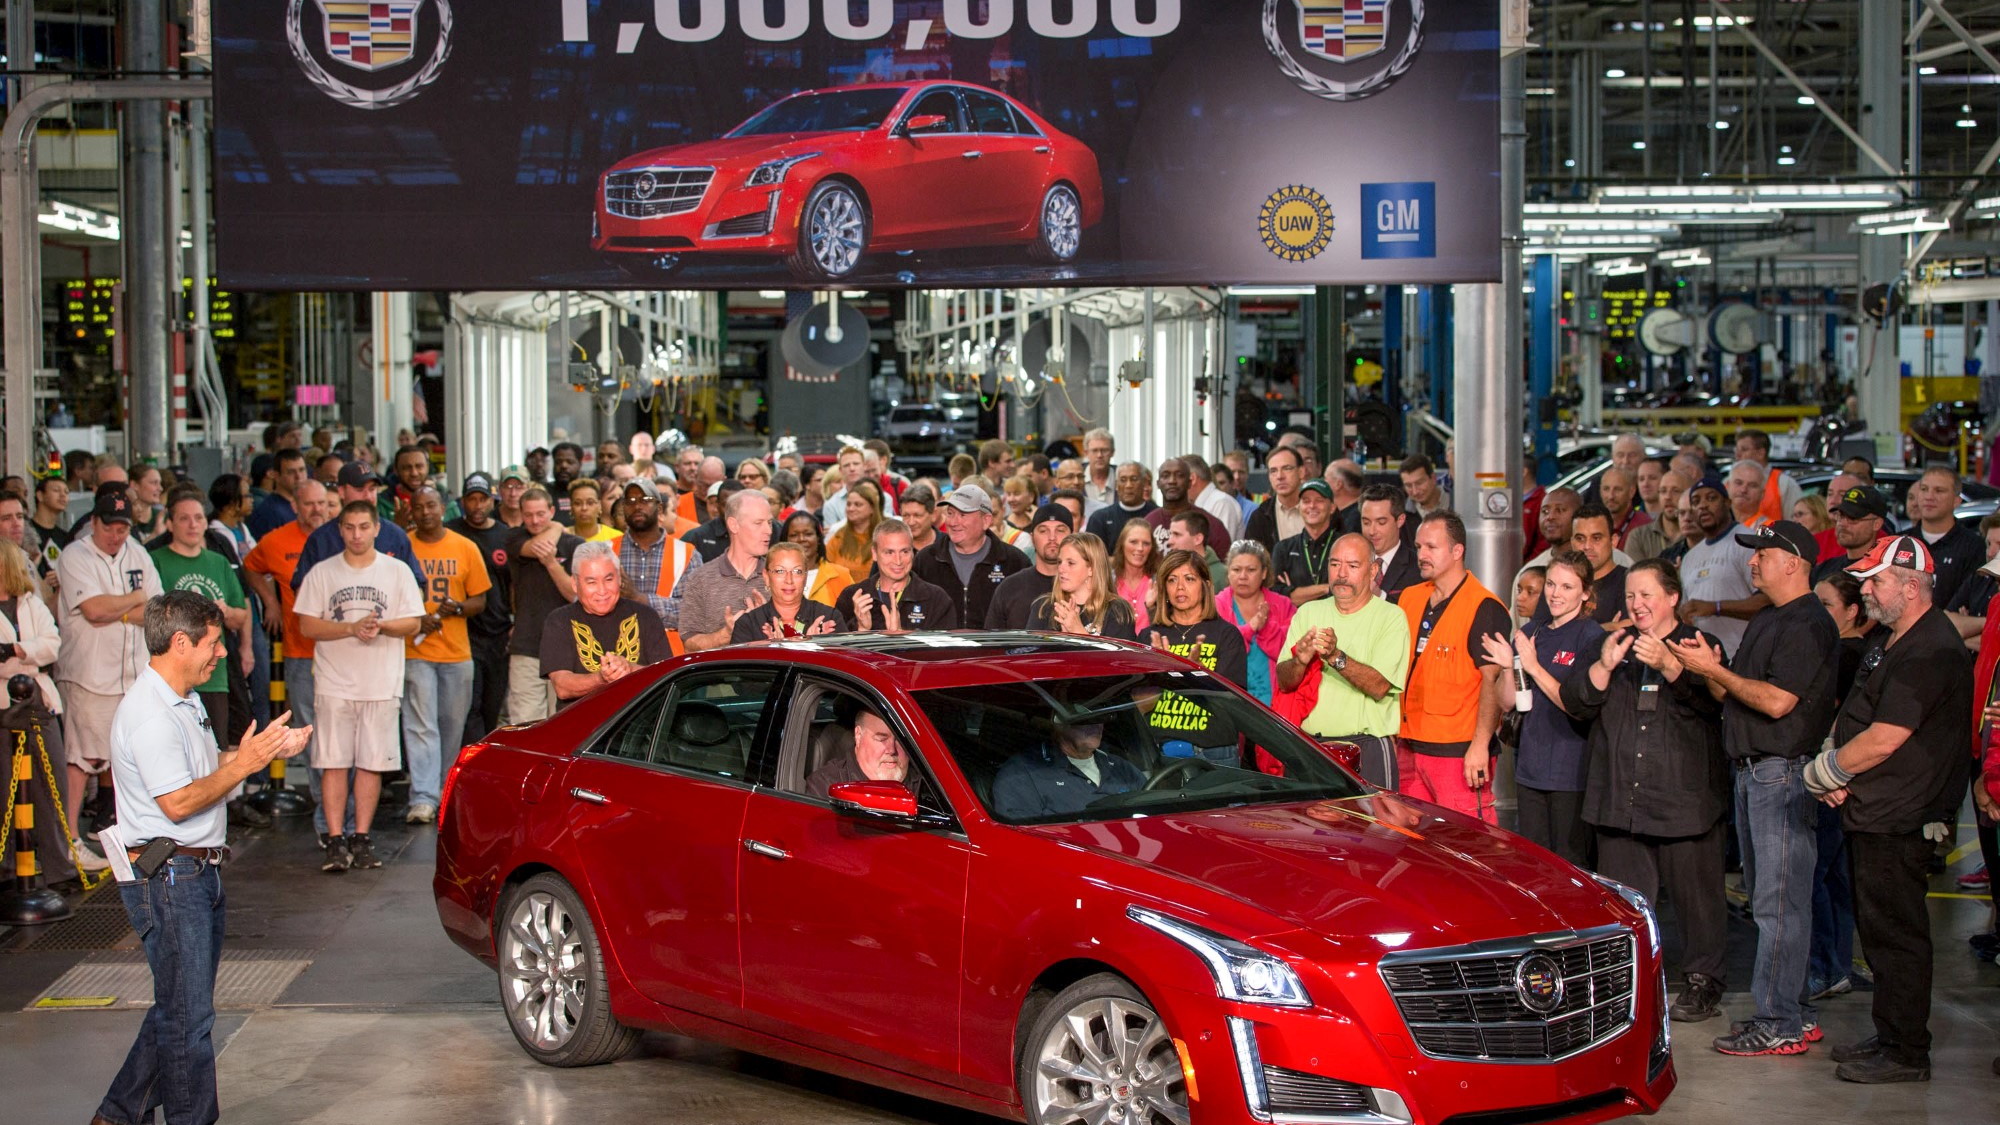 One-millionth Cadillac built is a 2014 CTS.